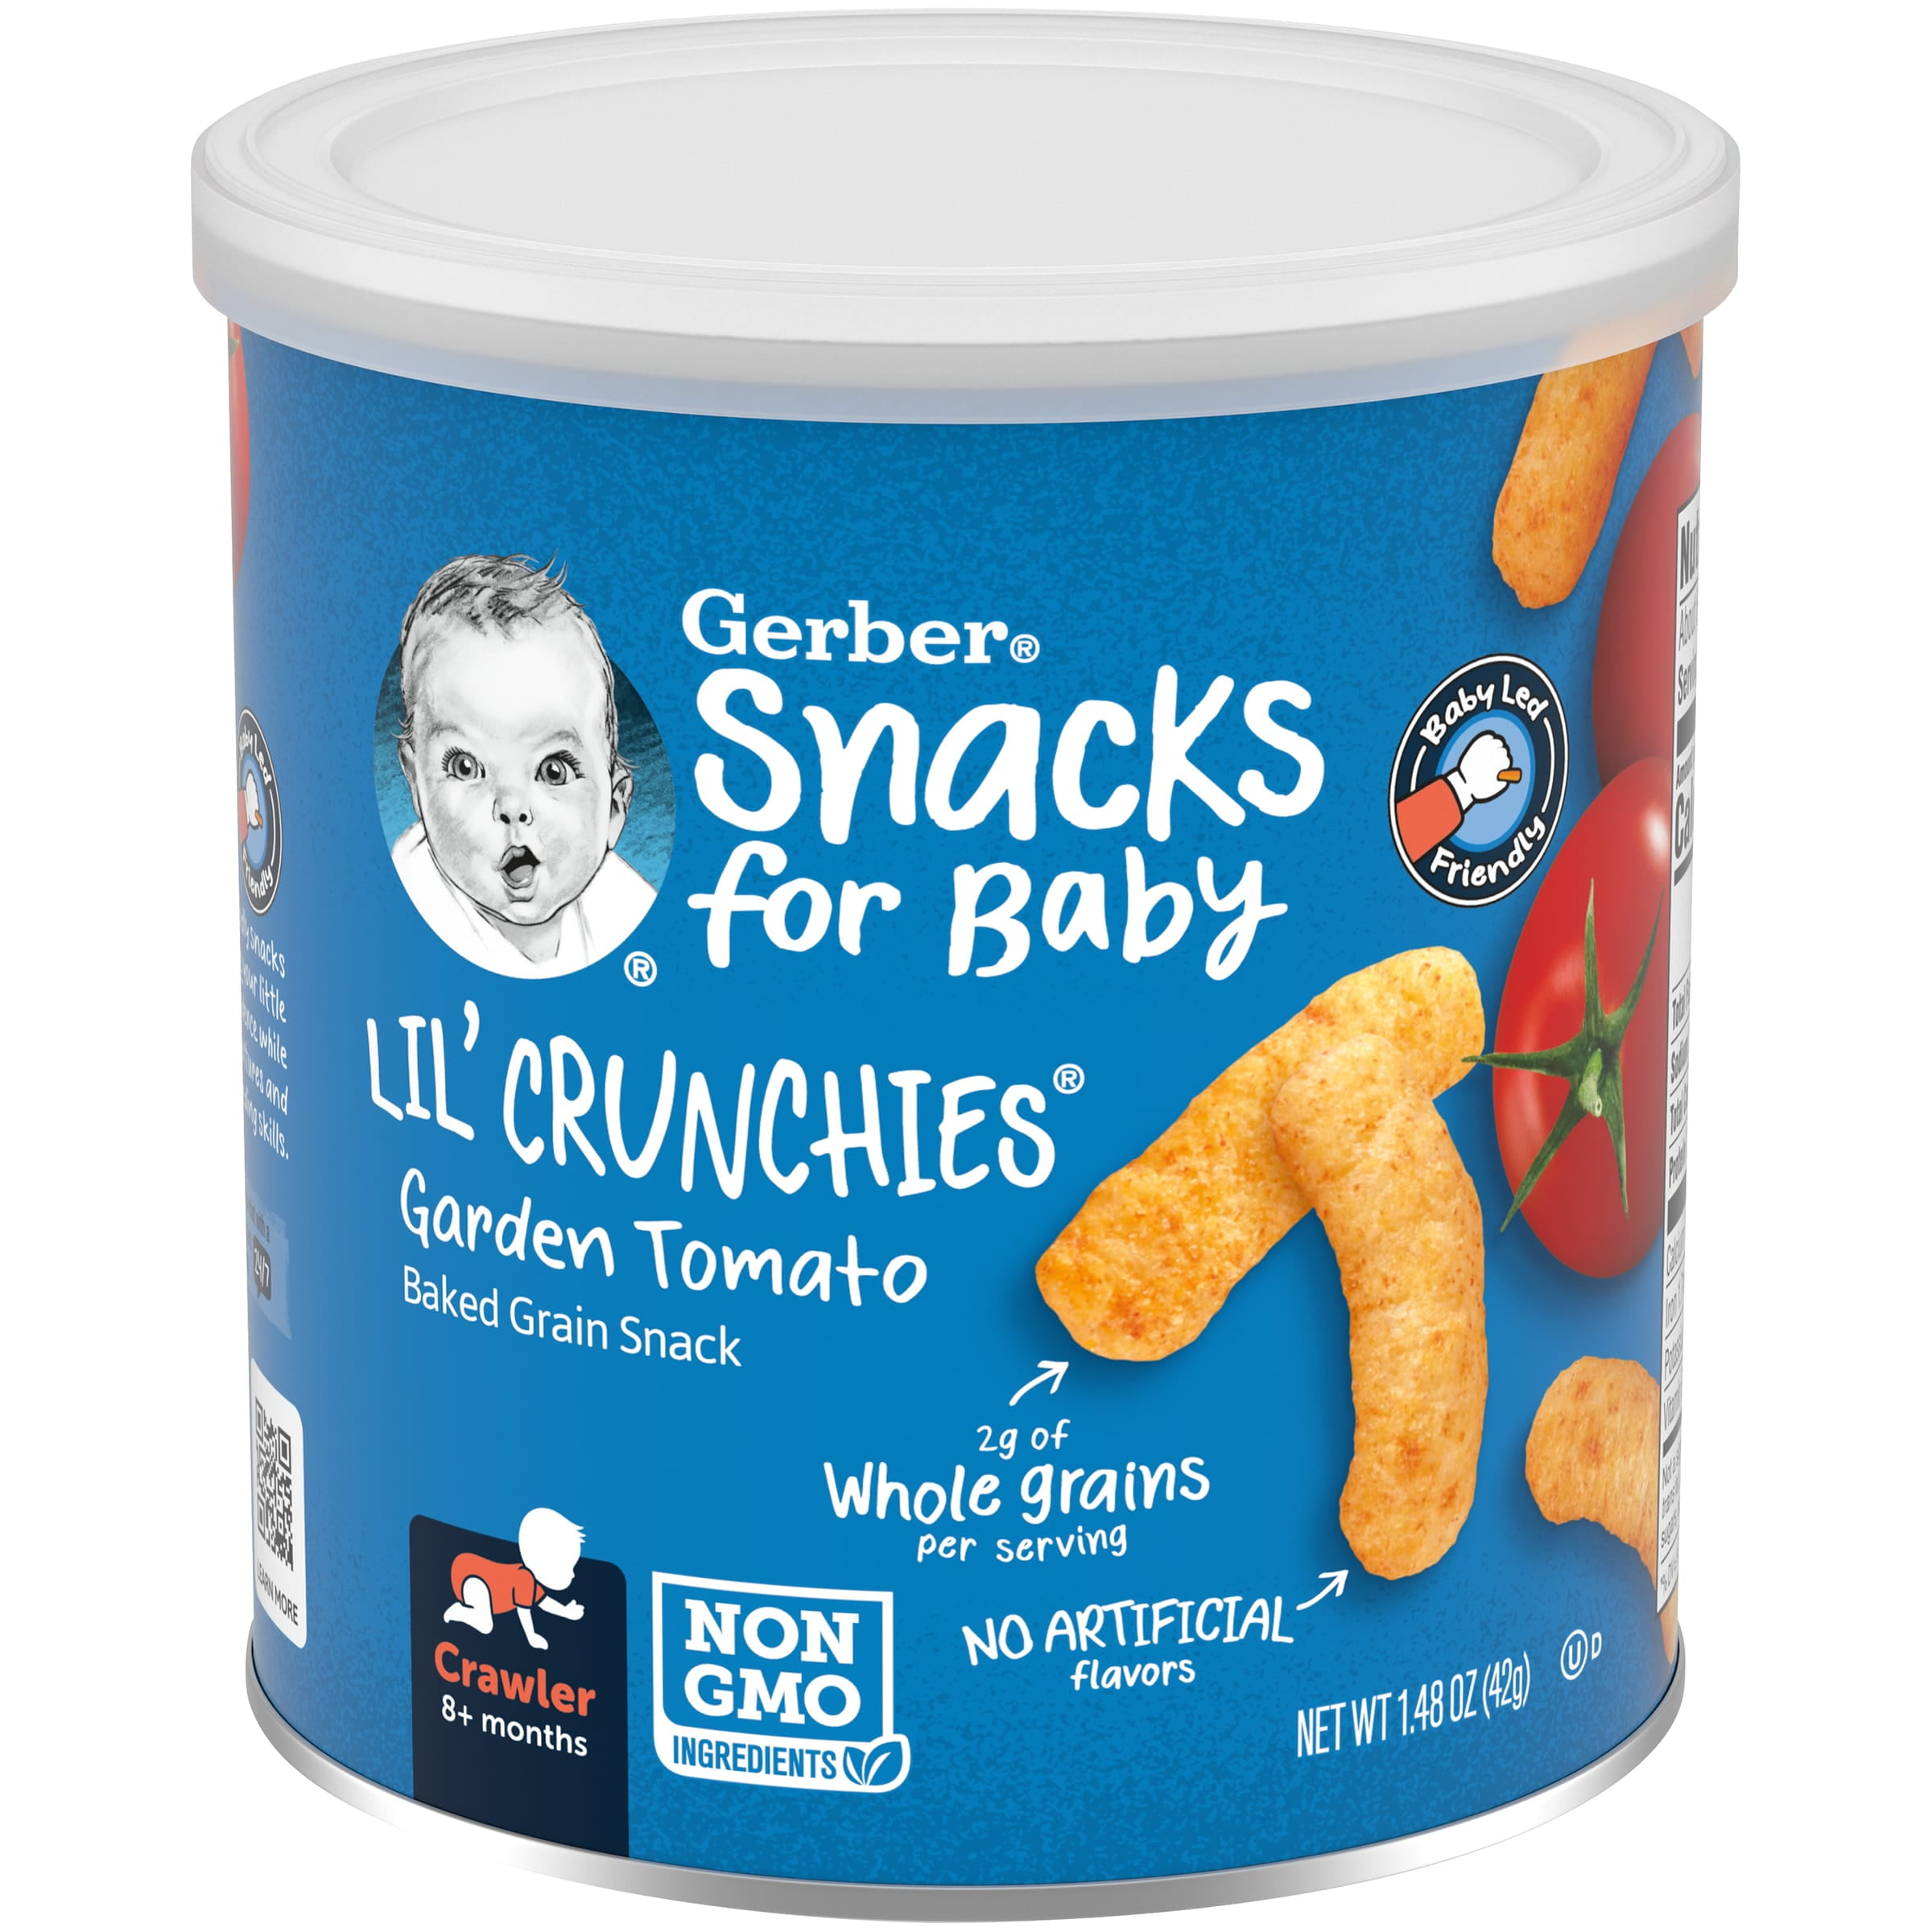 Gerber Snacks for Baby Lil Crunchies Garden Tomato Puffs, 1.48 oz Canister (6 Pack)